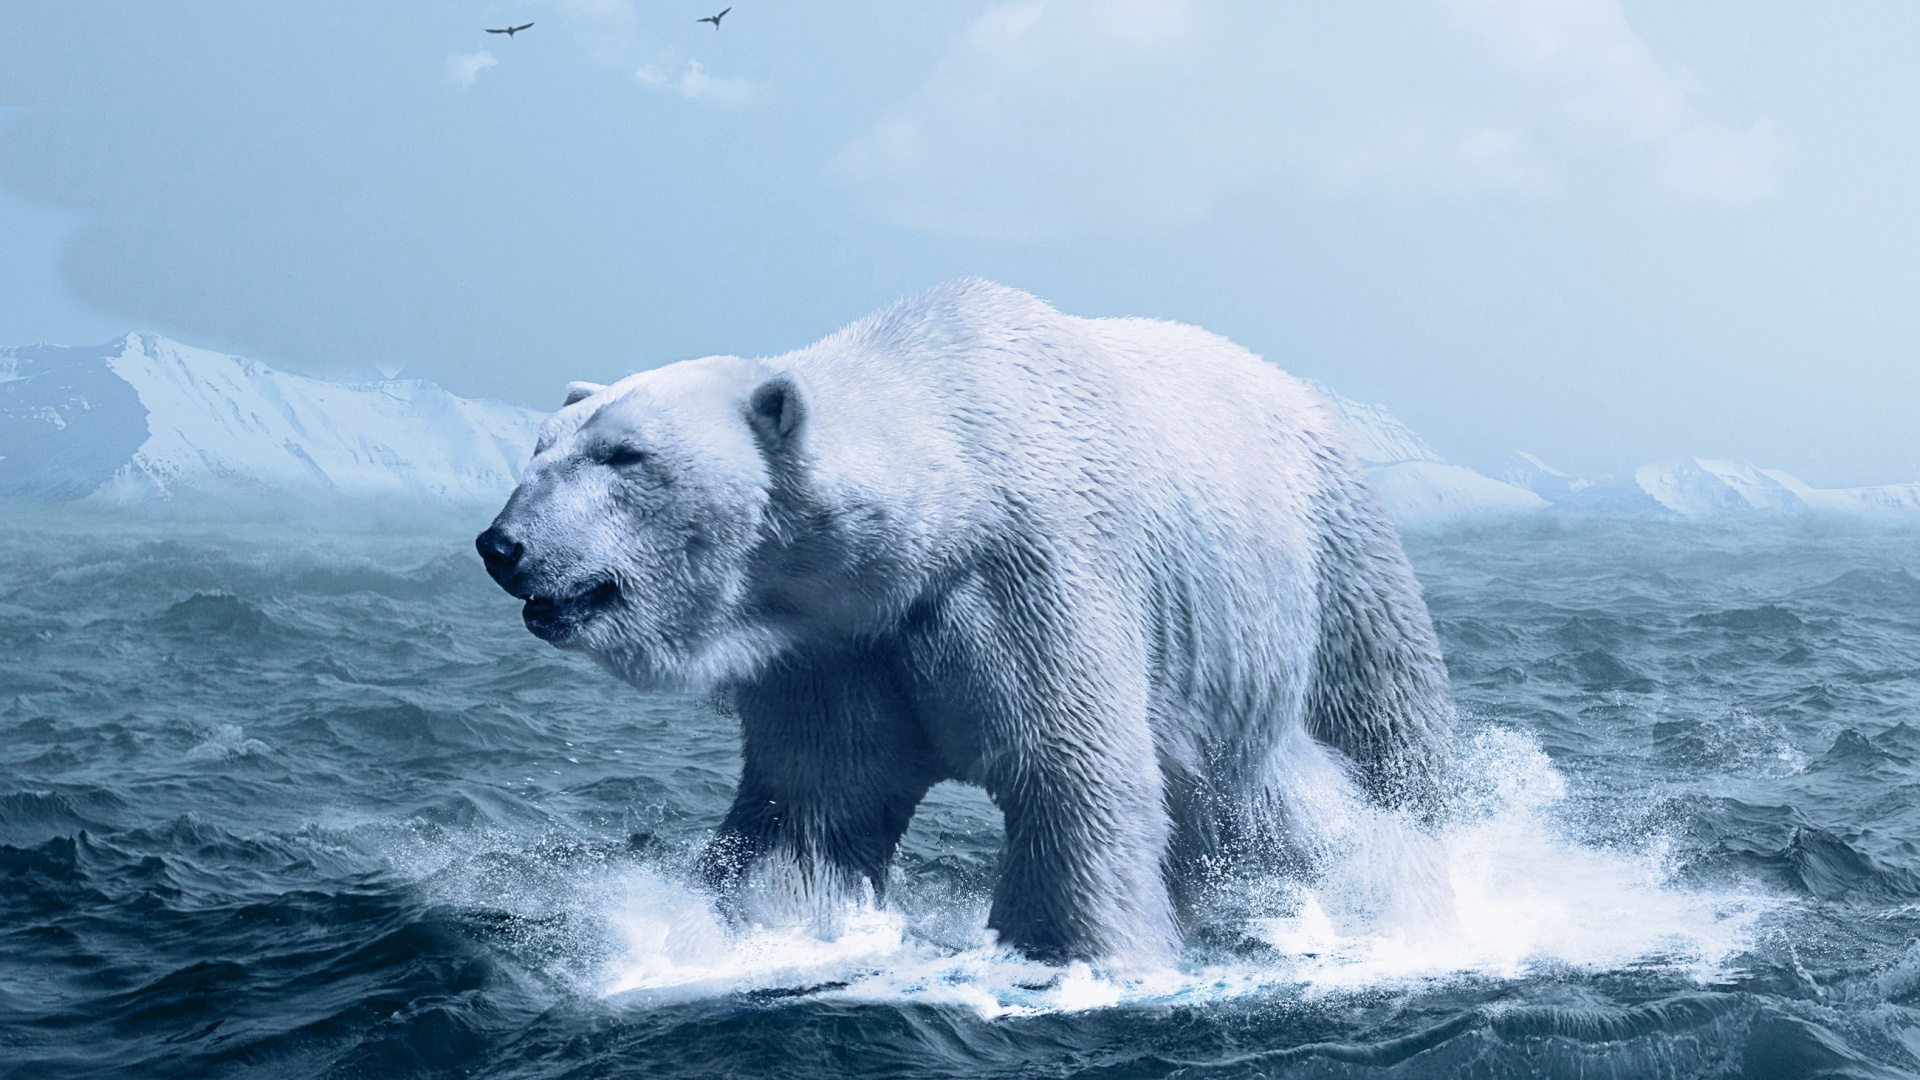 Polar Bear on The Water. Wallpaper in 1920x1080 Resolution